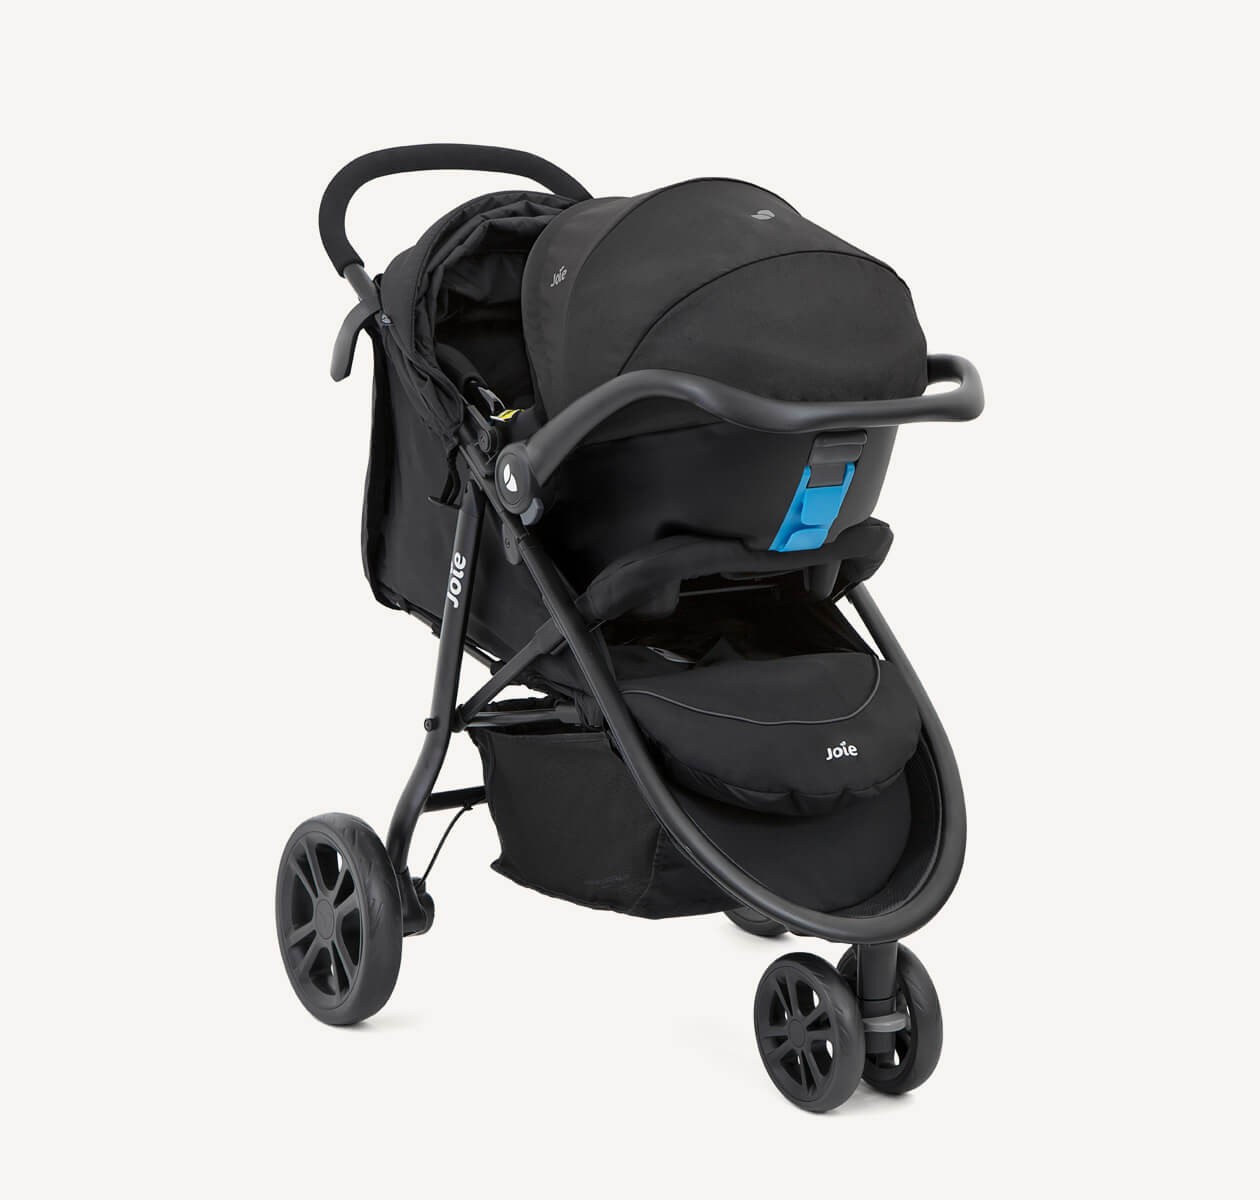 Joie litetrax 3 travel system in black with gemm infant carrier at an angle.